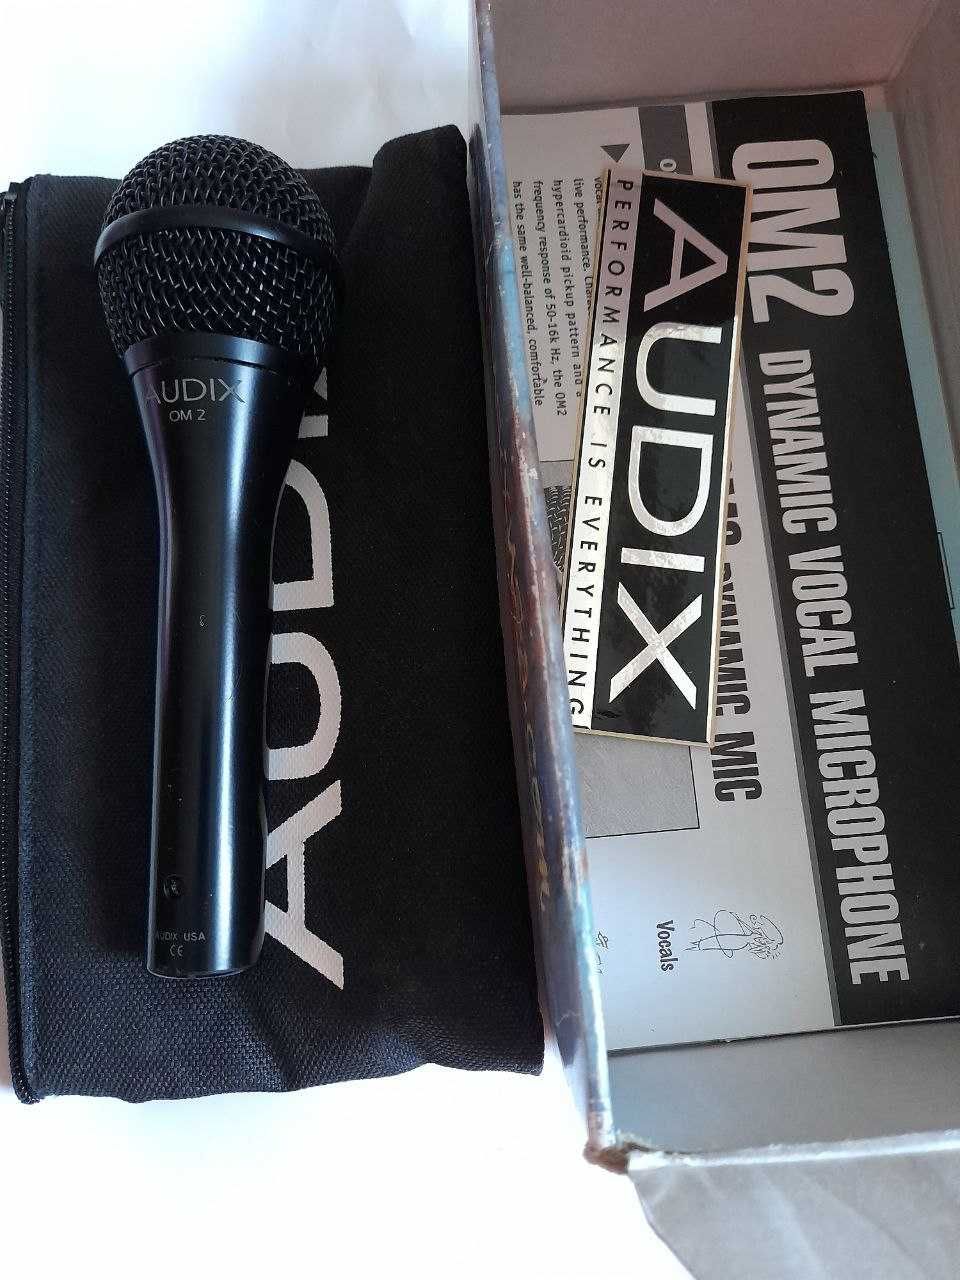 Мікрофон Audix OM-2 Made in USA.